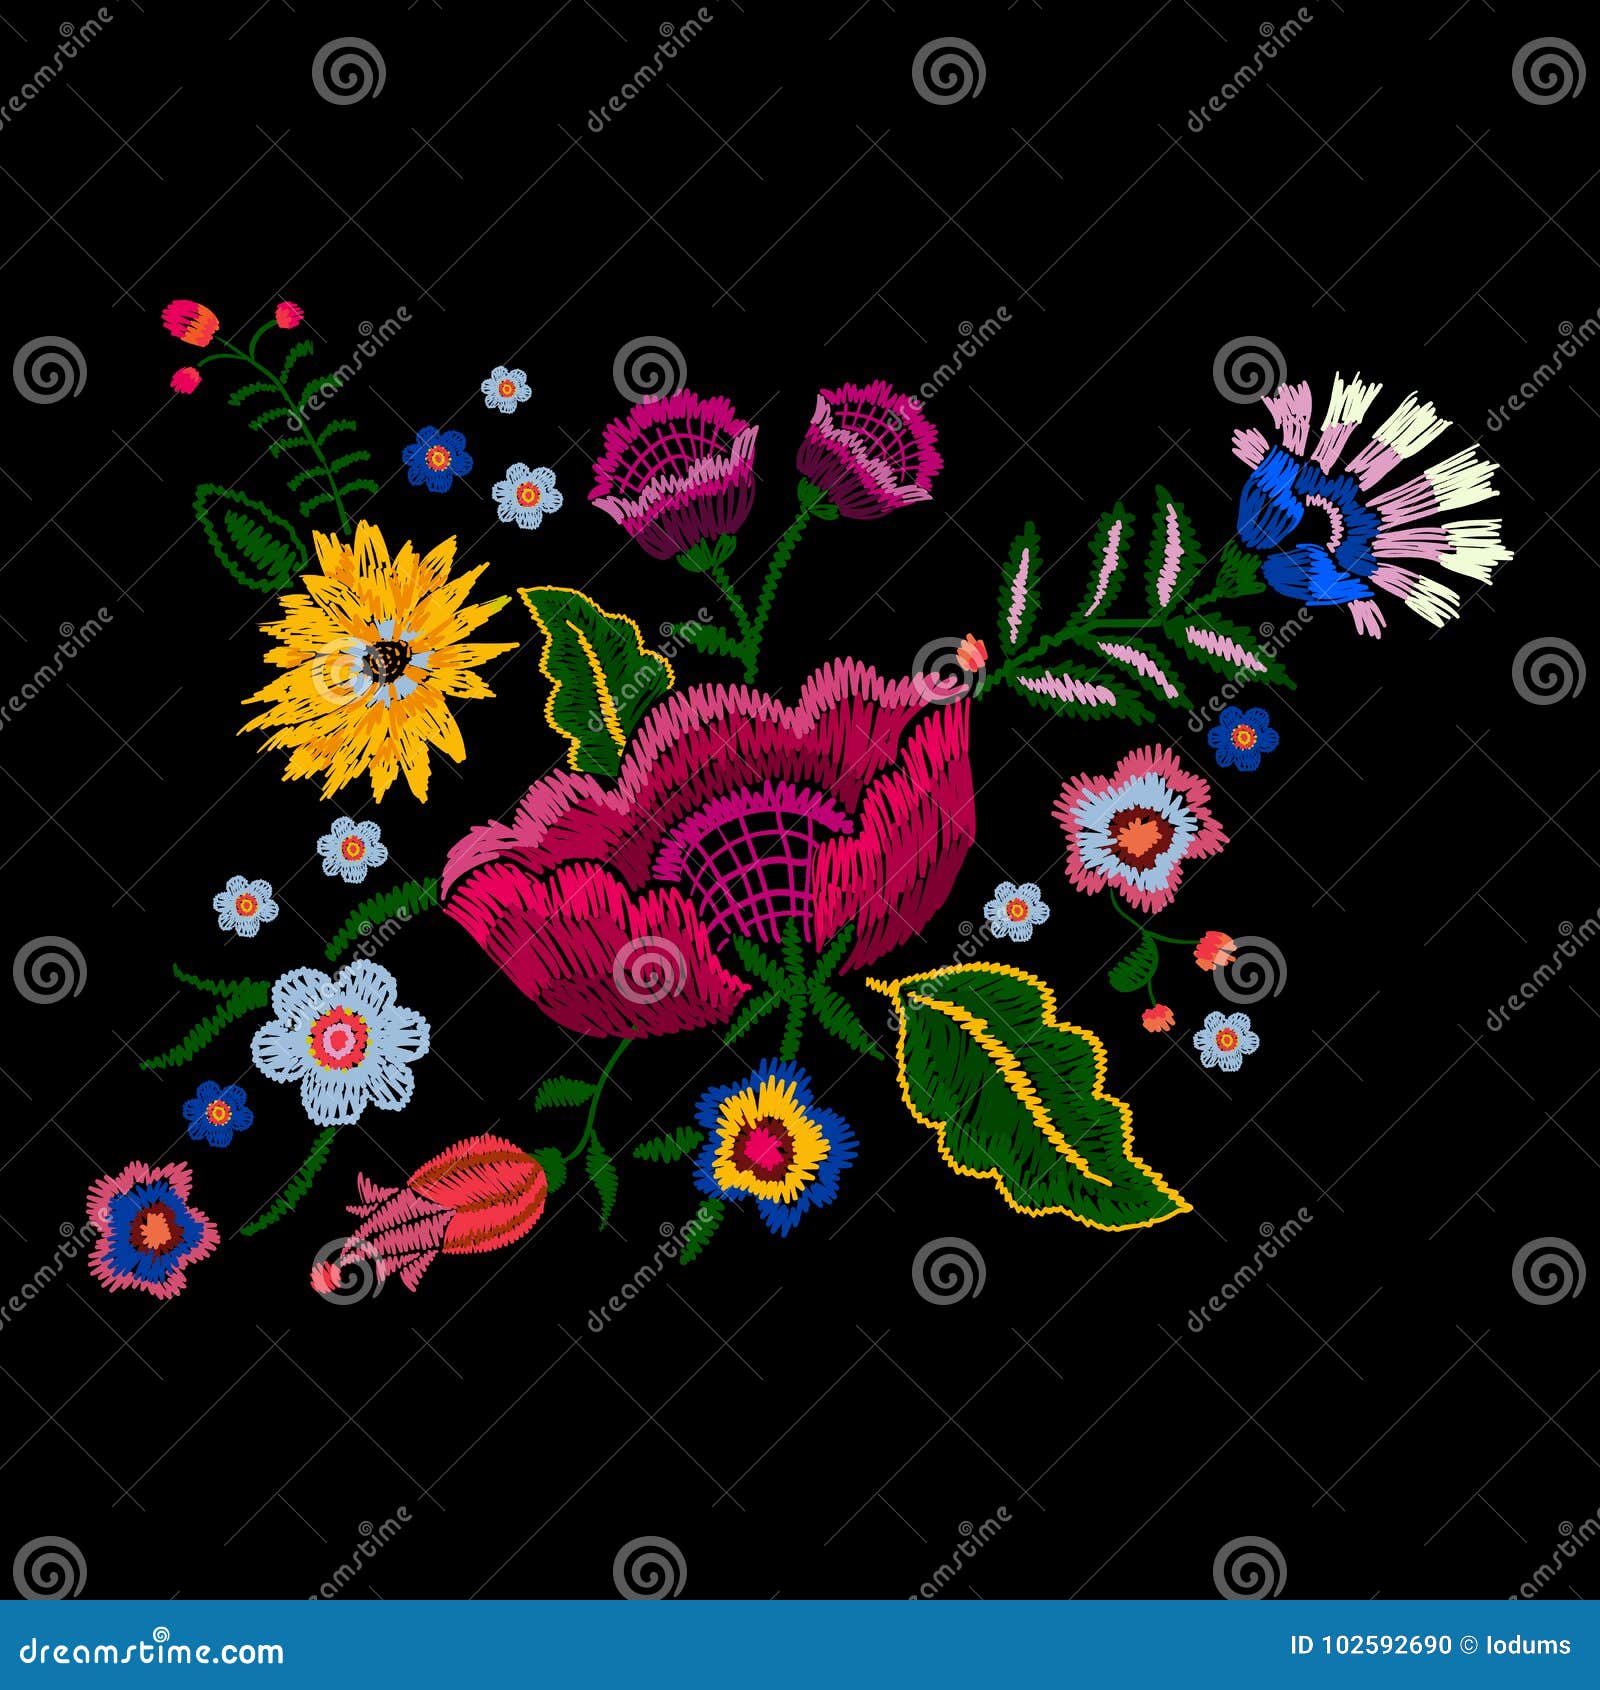 Embroidery Plums And Roses Flowers Seamless Pattern Template